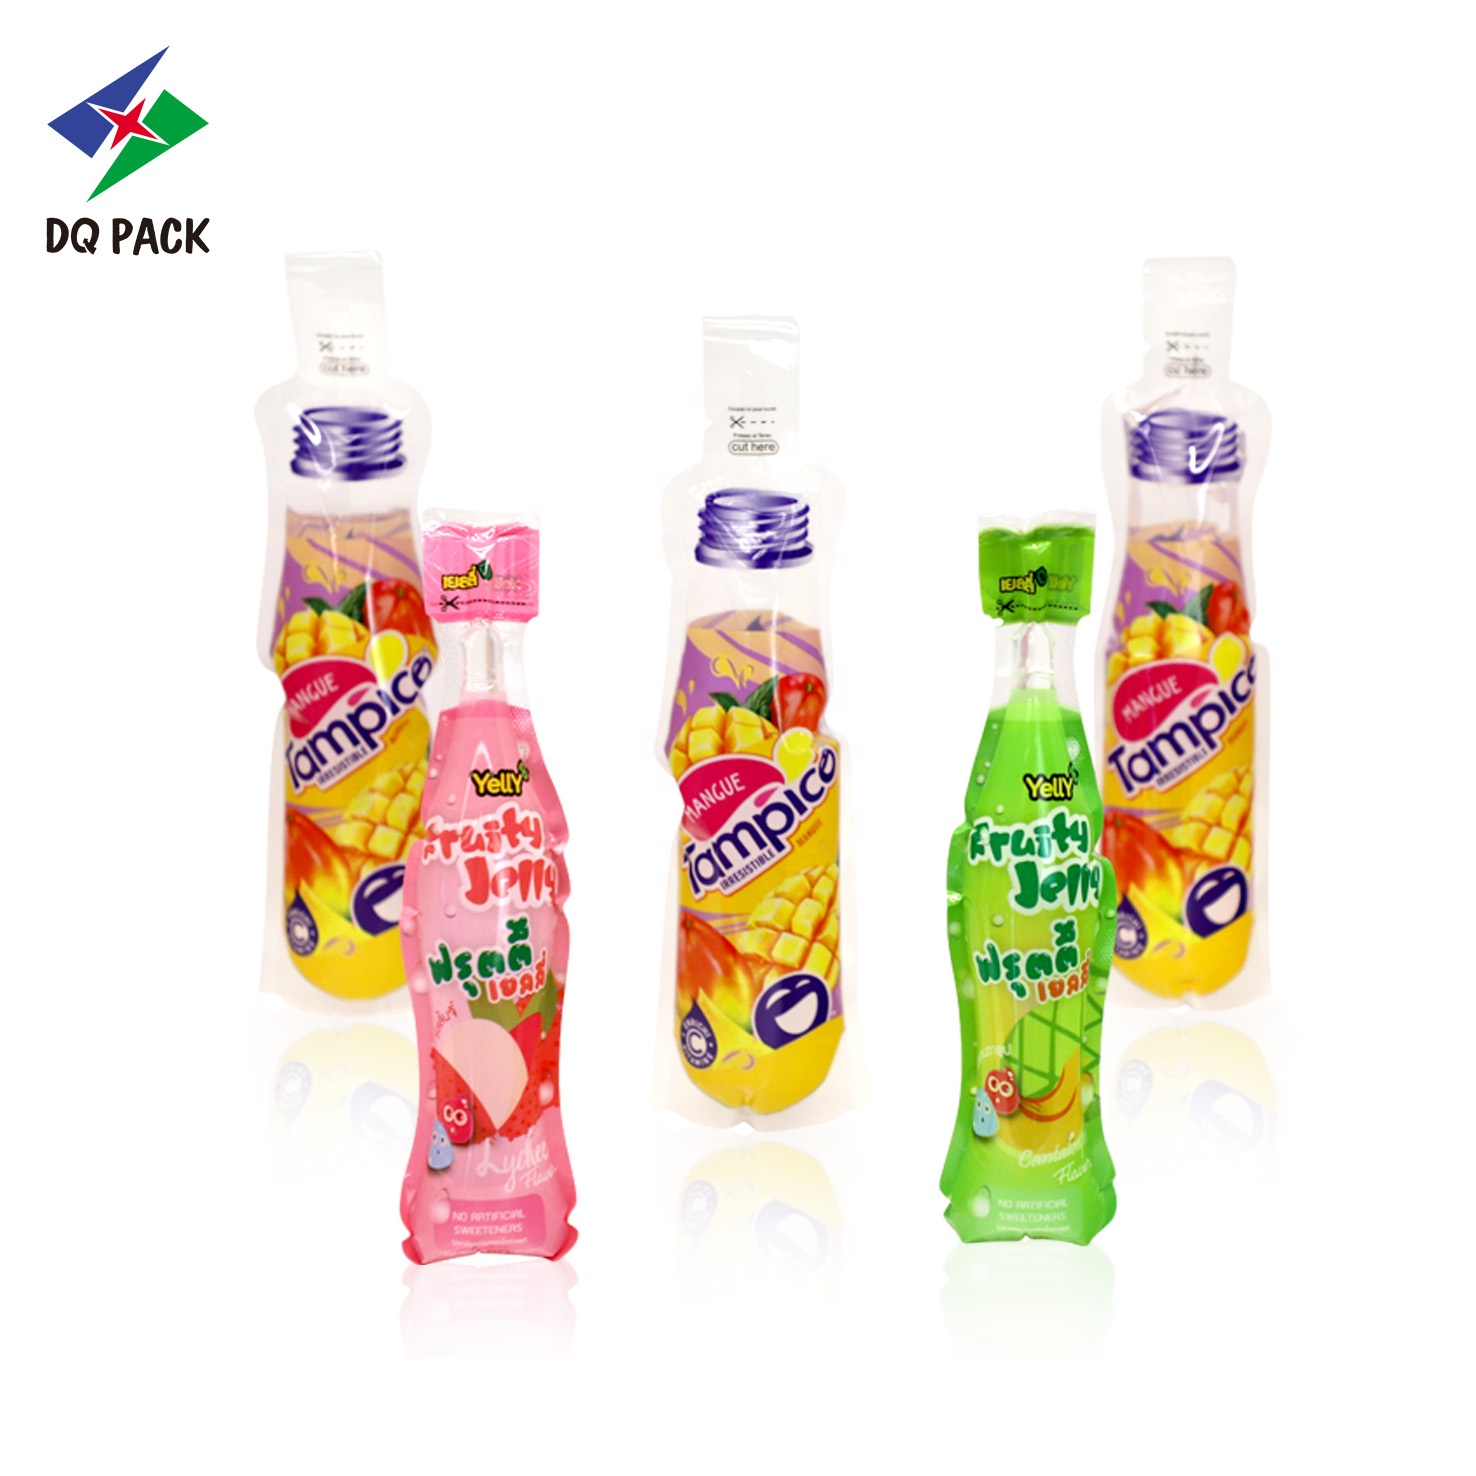 DQ PACK Custom Printed 80ml Beverage Juice Drink pouch Liquid Heat Seal Injection Pouch Fruit Packing Plastic Bag